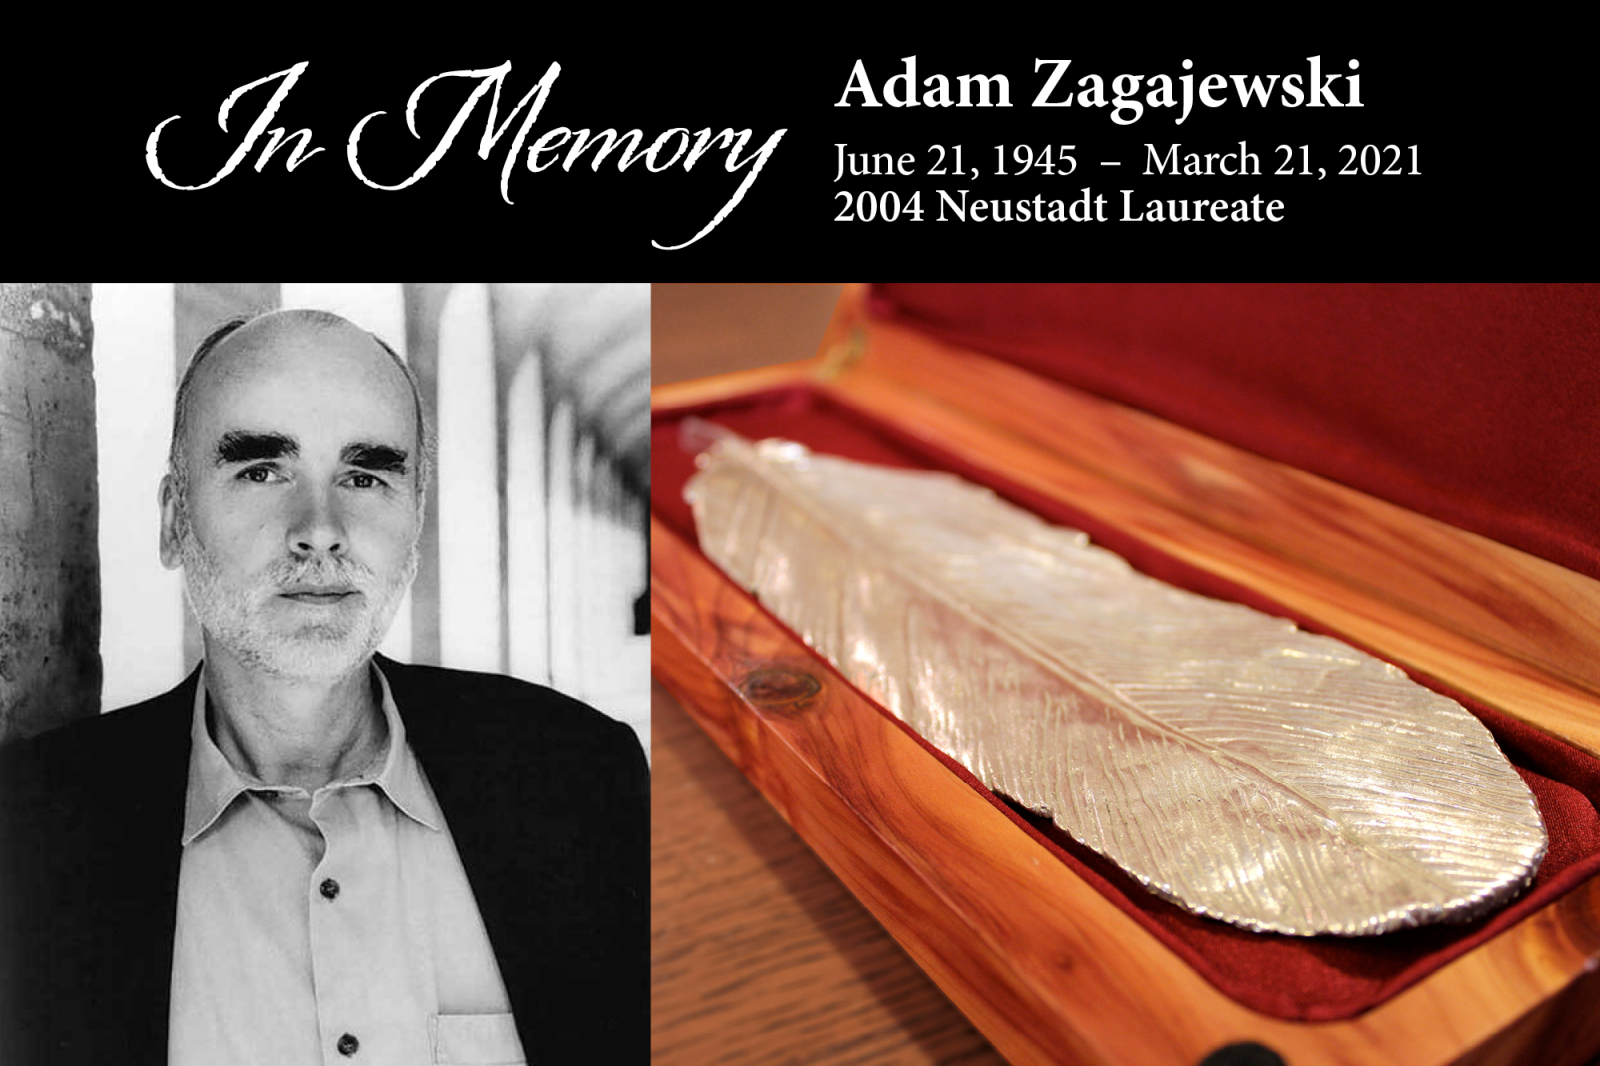 A photograph of Adam Zagajewski juxtaposed with an image of a pewter feather in a wooden box. The text above reads: In Memory, Adam Zagajewski, 2004 Neustadt Laureate